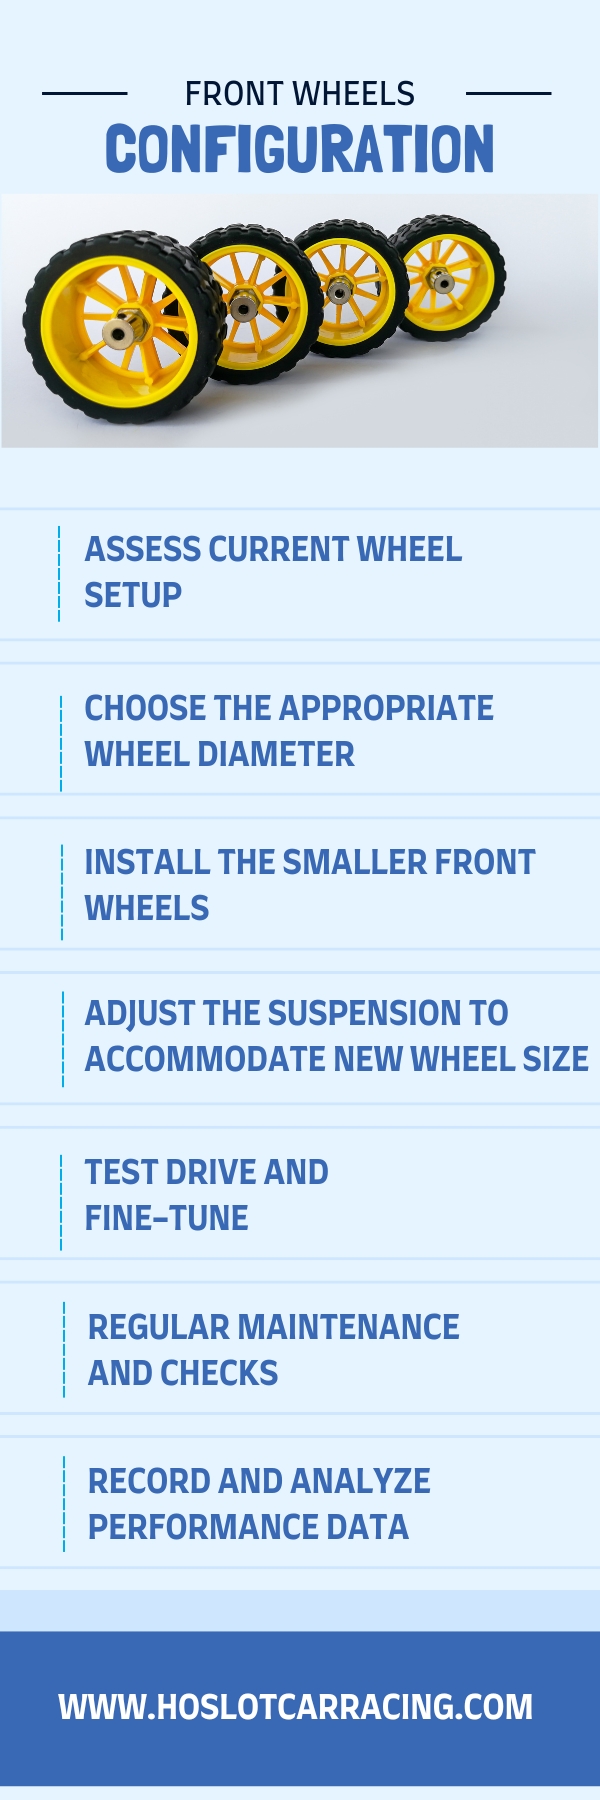 Front Wheels Configuration infographic